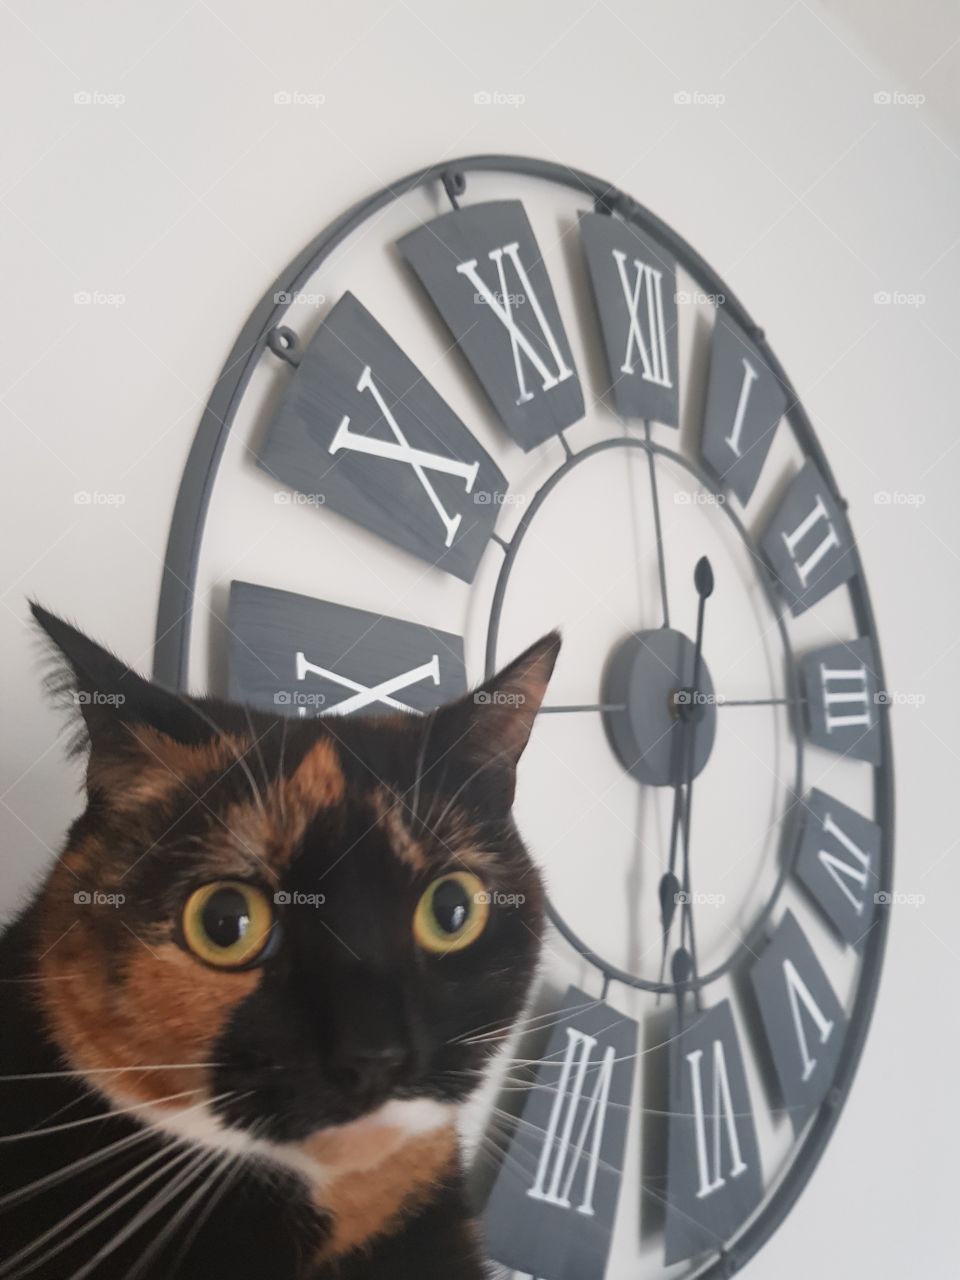 When you remember the clocks have gone forward!